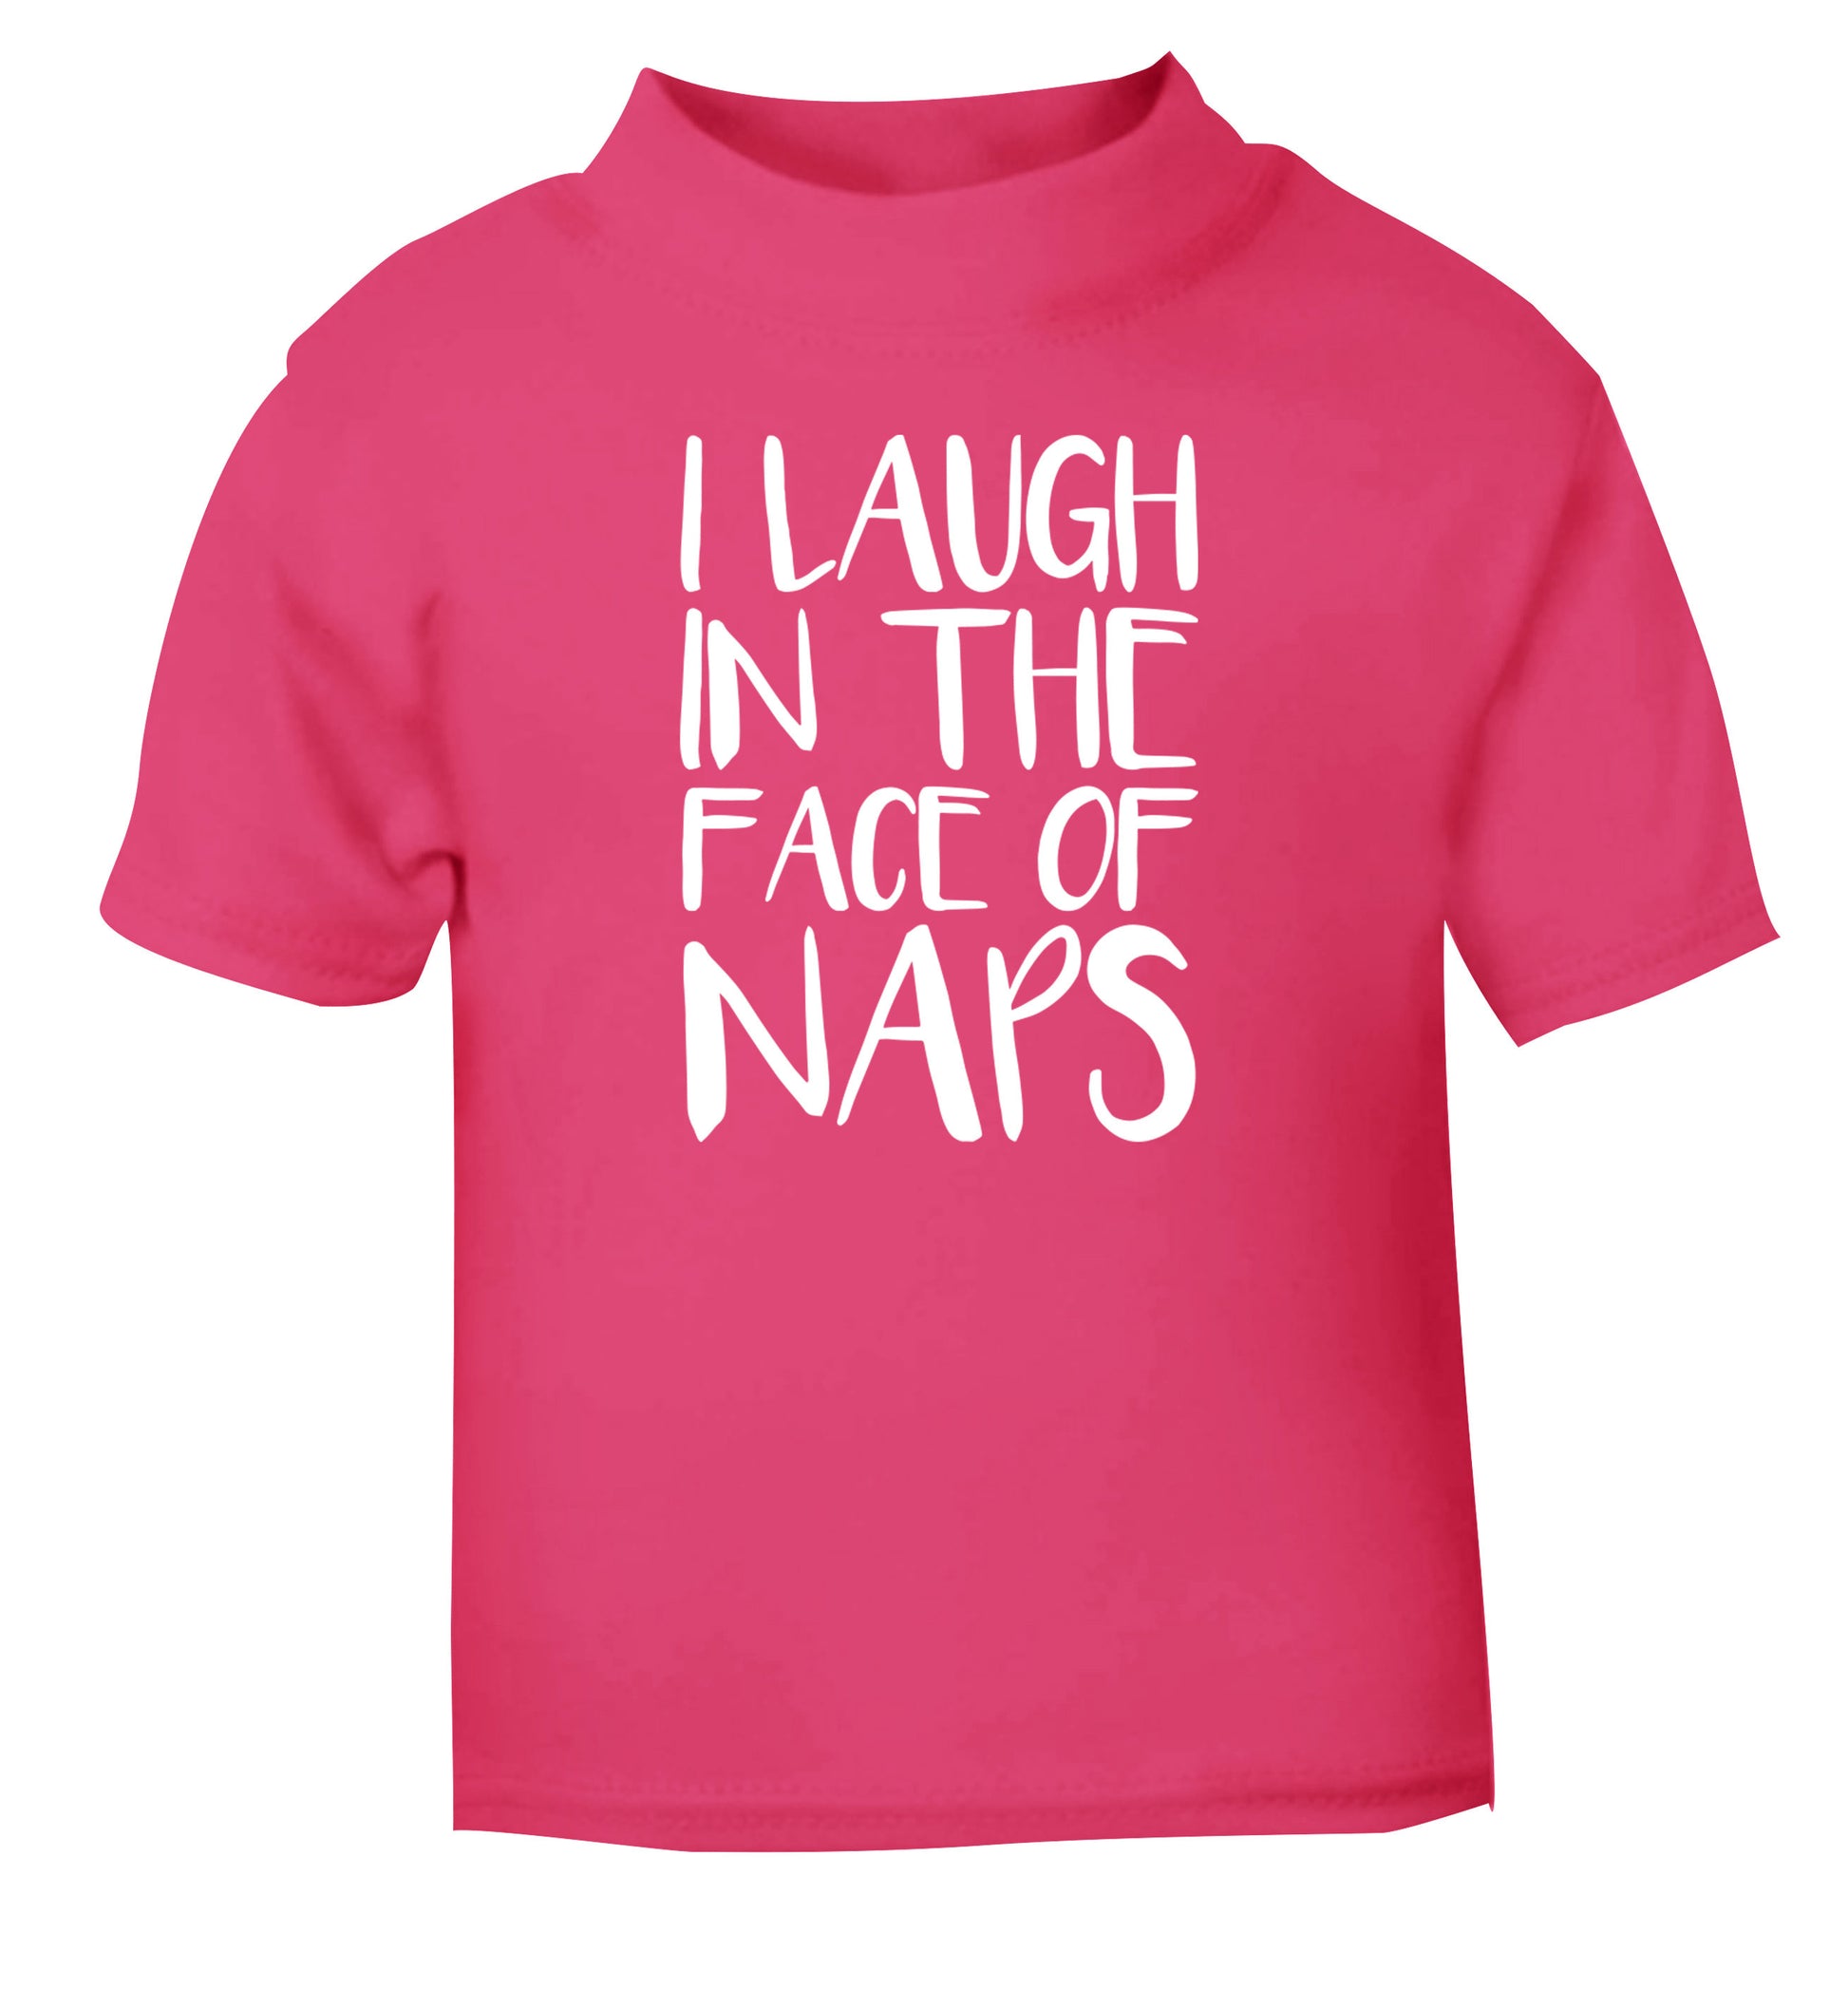 I laugh in the face of naps pink Baby Toddler Tshirt 2 Years